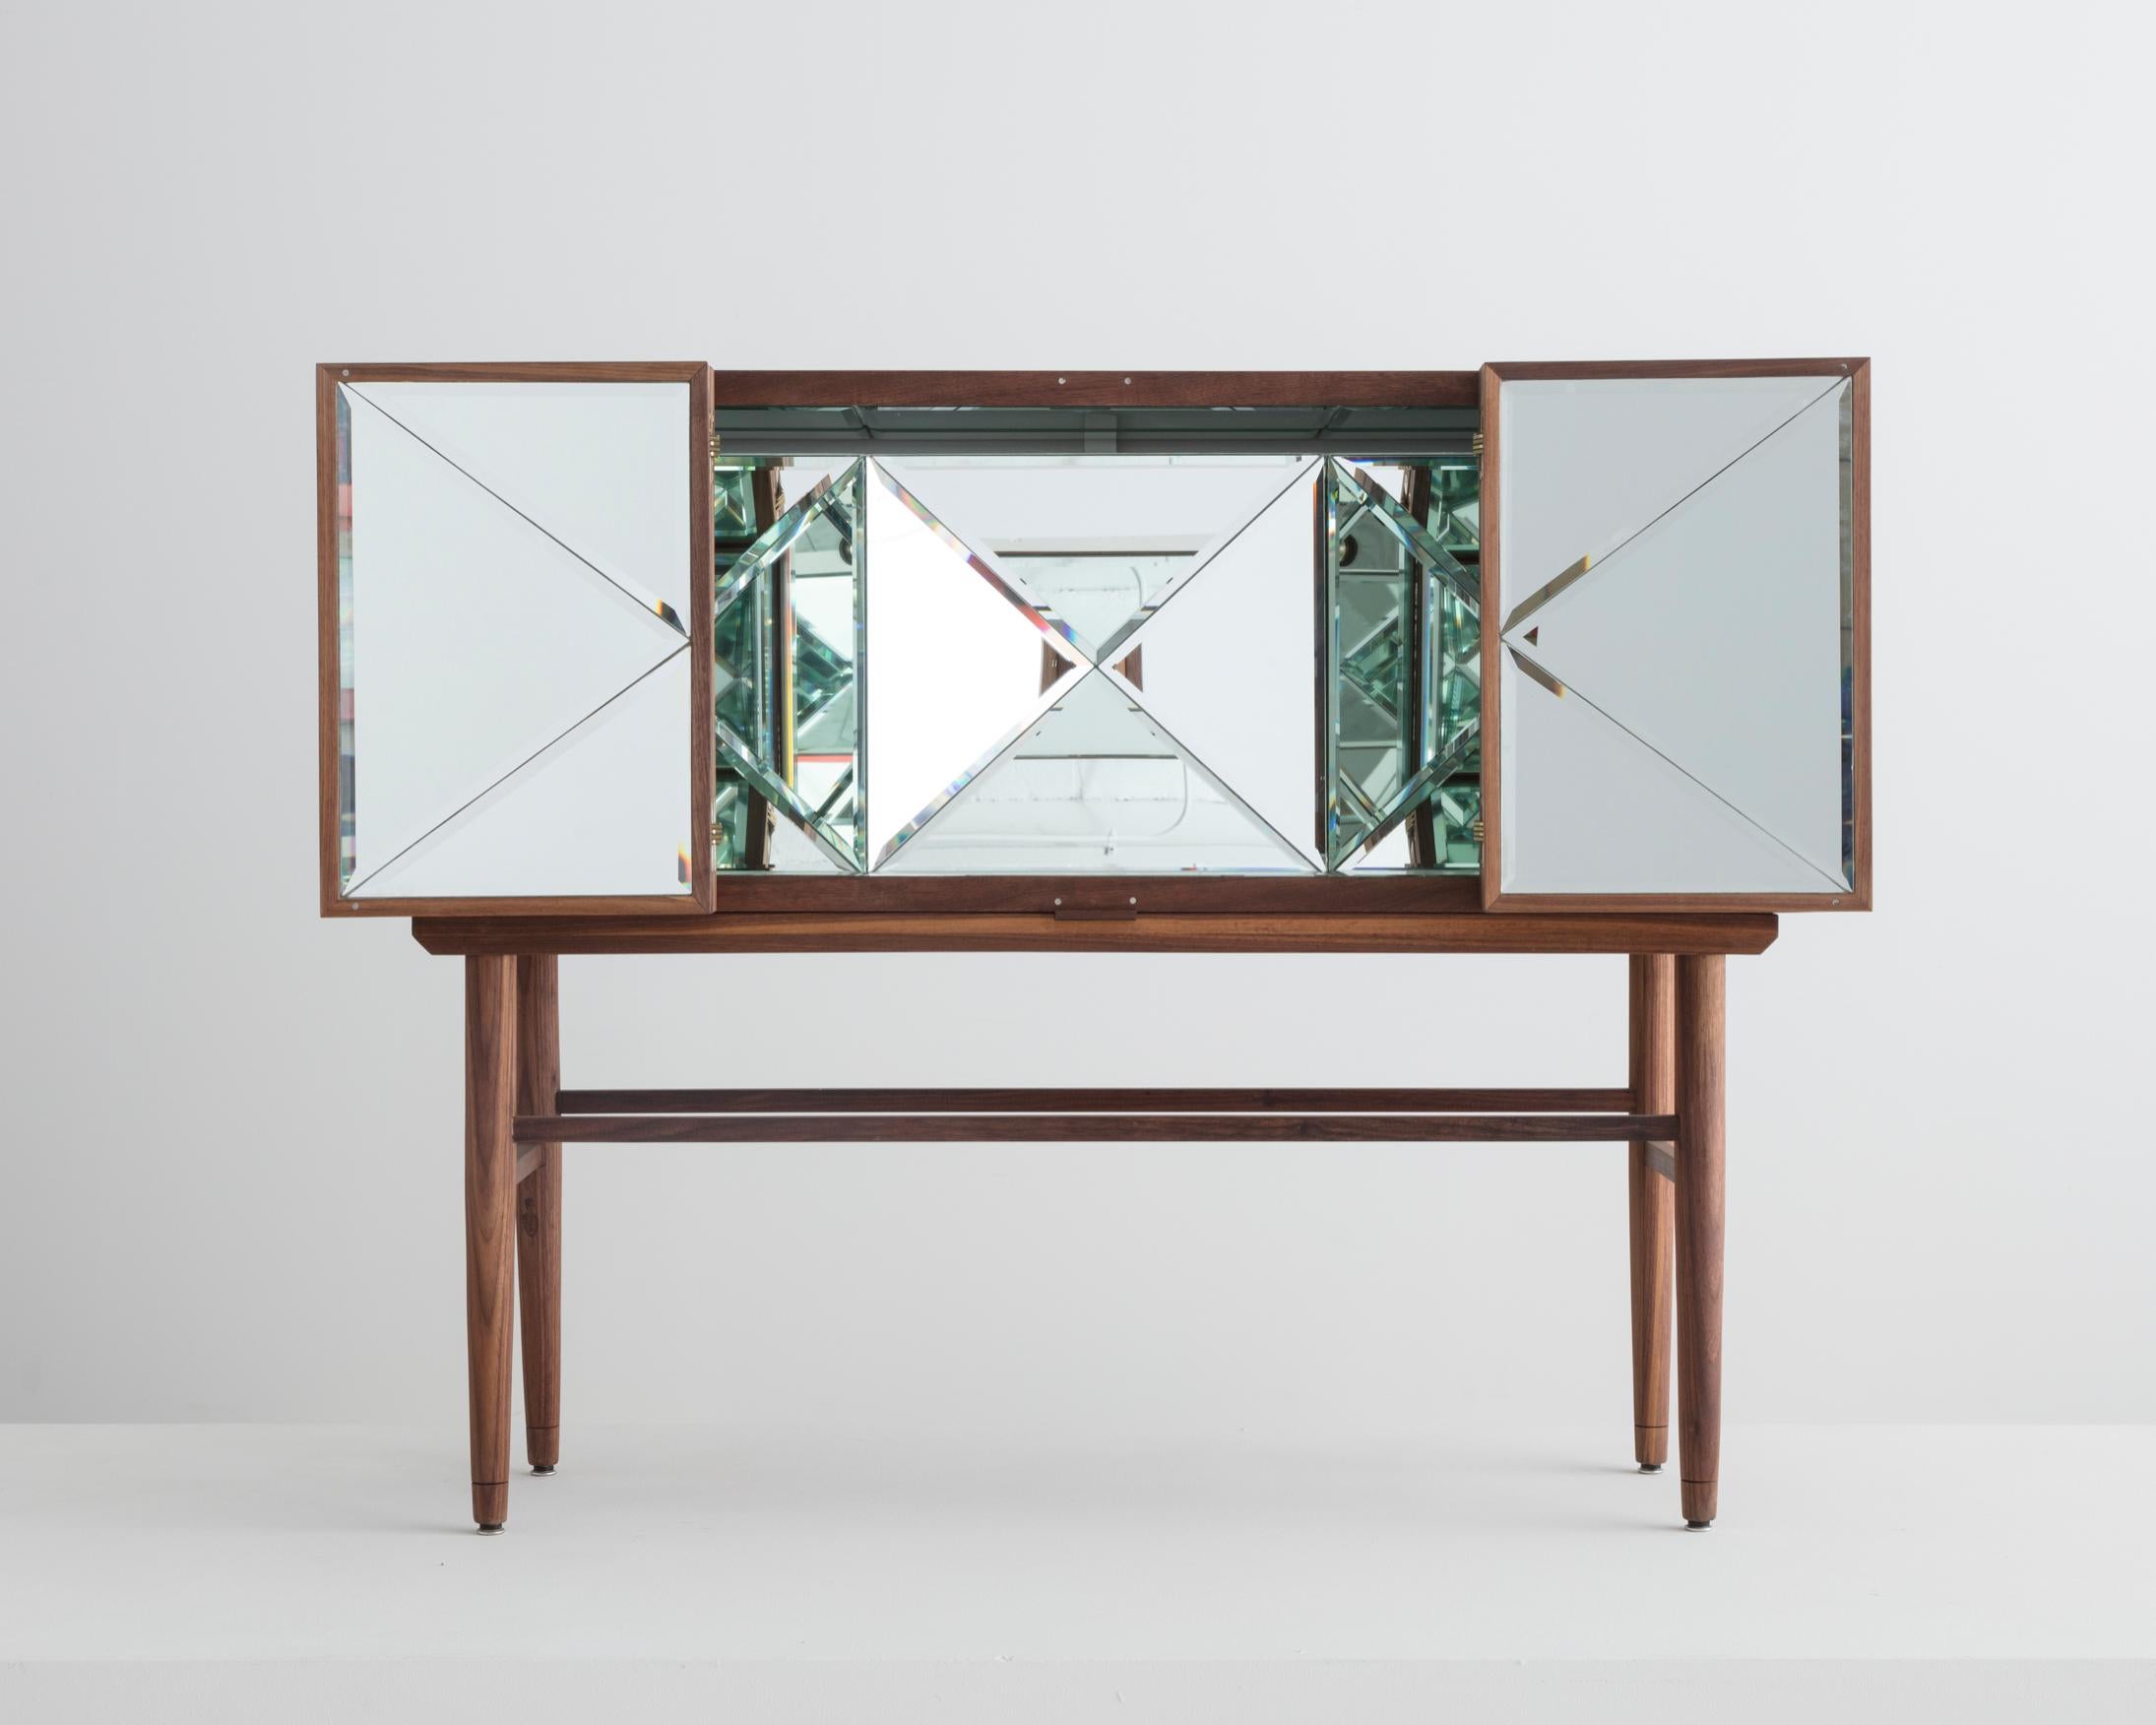 Kaleidoscope cabinet in walnut, mirror, glass, bronze, optical lens, and electric components. Designed by Sebastian ErraZuriz, USA, 2013. This example produced in 2018. Number 4 from an edition of 8 + 2AP.
 